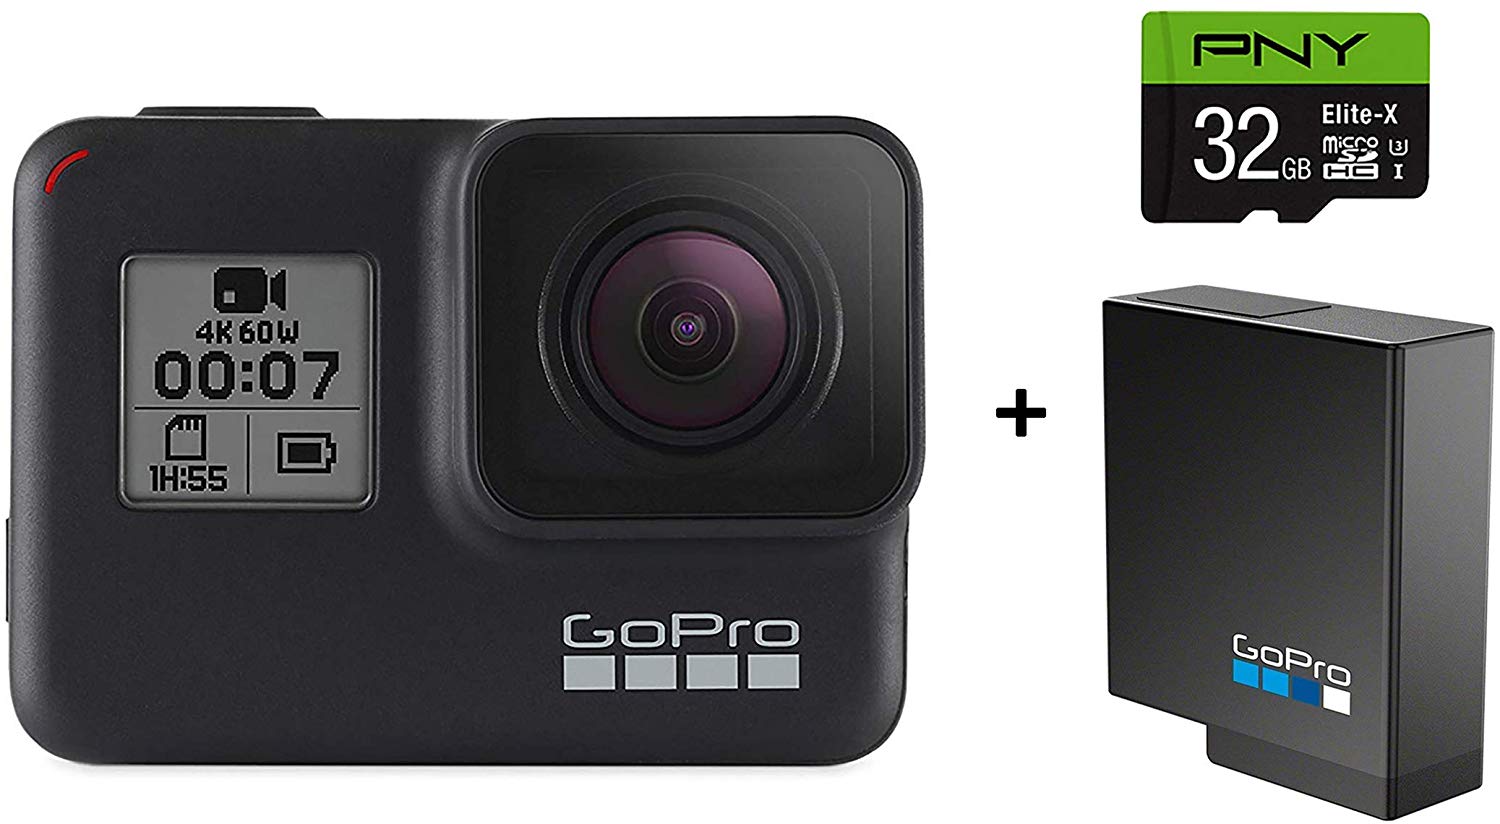 GoPro HERO7 Black Camera + Extra Rechargeable Battery + PNY Elite-X 32GB U3 MicroSDHC Card (Bundle) | Action | Fishing | Spinning | Sport | Gift | Birthday | Christmas | Outdoor